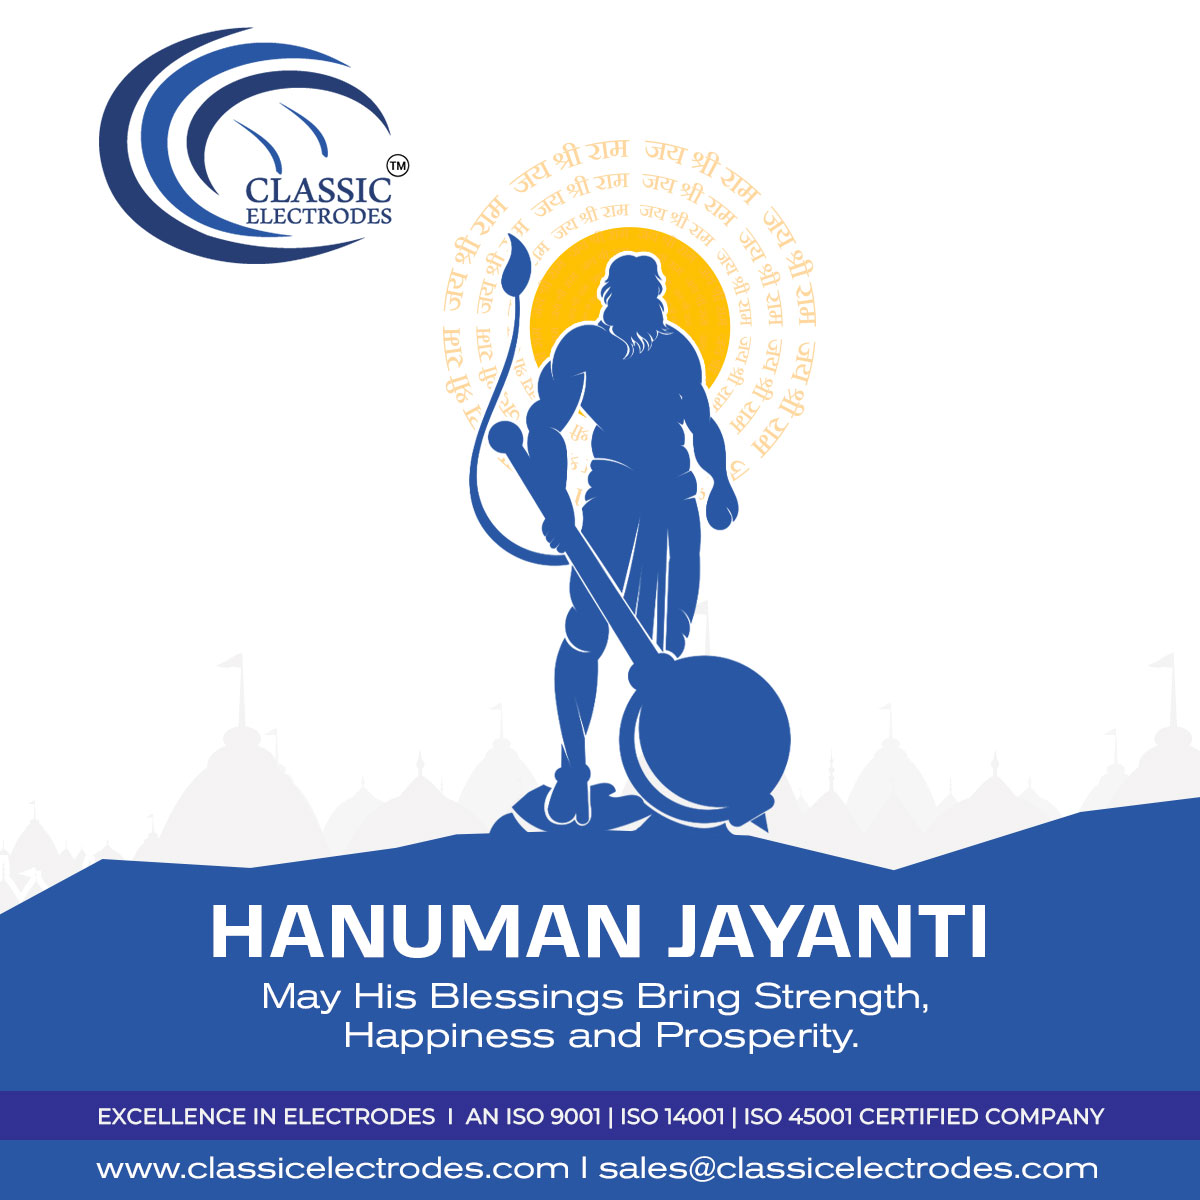 Celebrating Hanuman Jayanti with joy and devotion. May we stay forever under the holy grace of Lord Hanuman.

#hanumanjayanti2024 #hanumanjayantispecial #Classicelectrodes #Steelstructures #steelfabrication